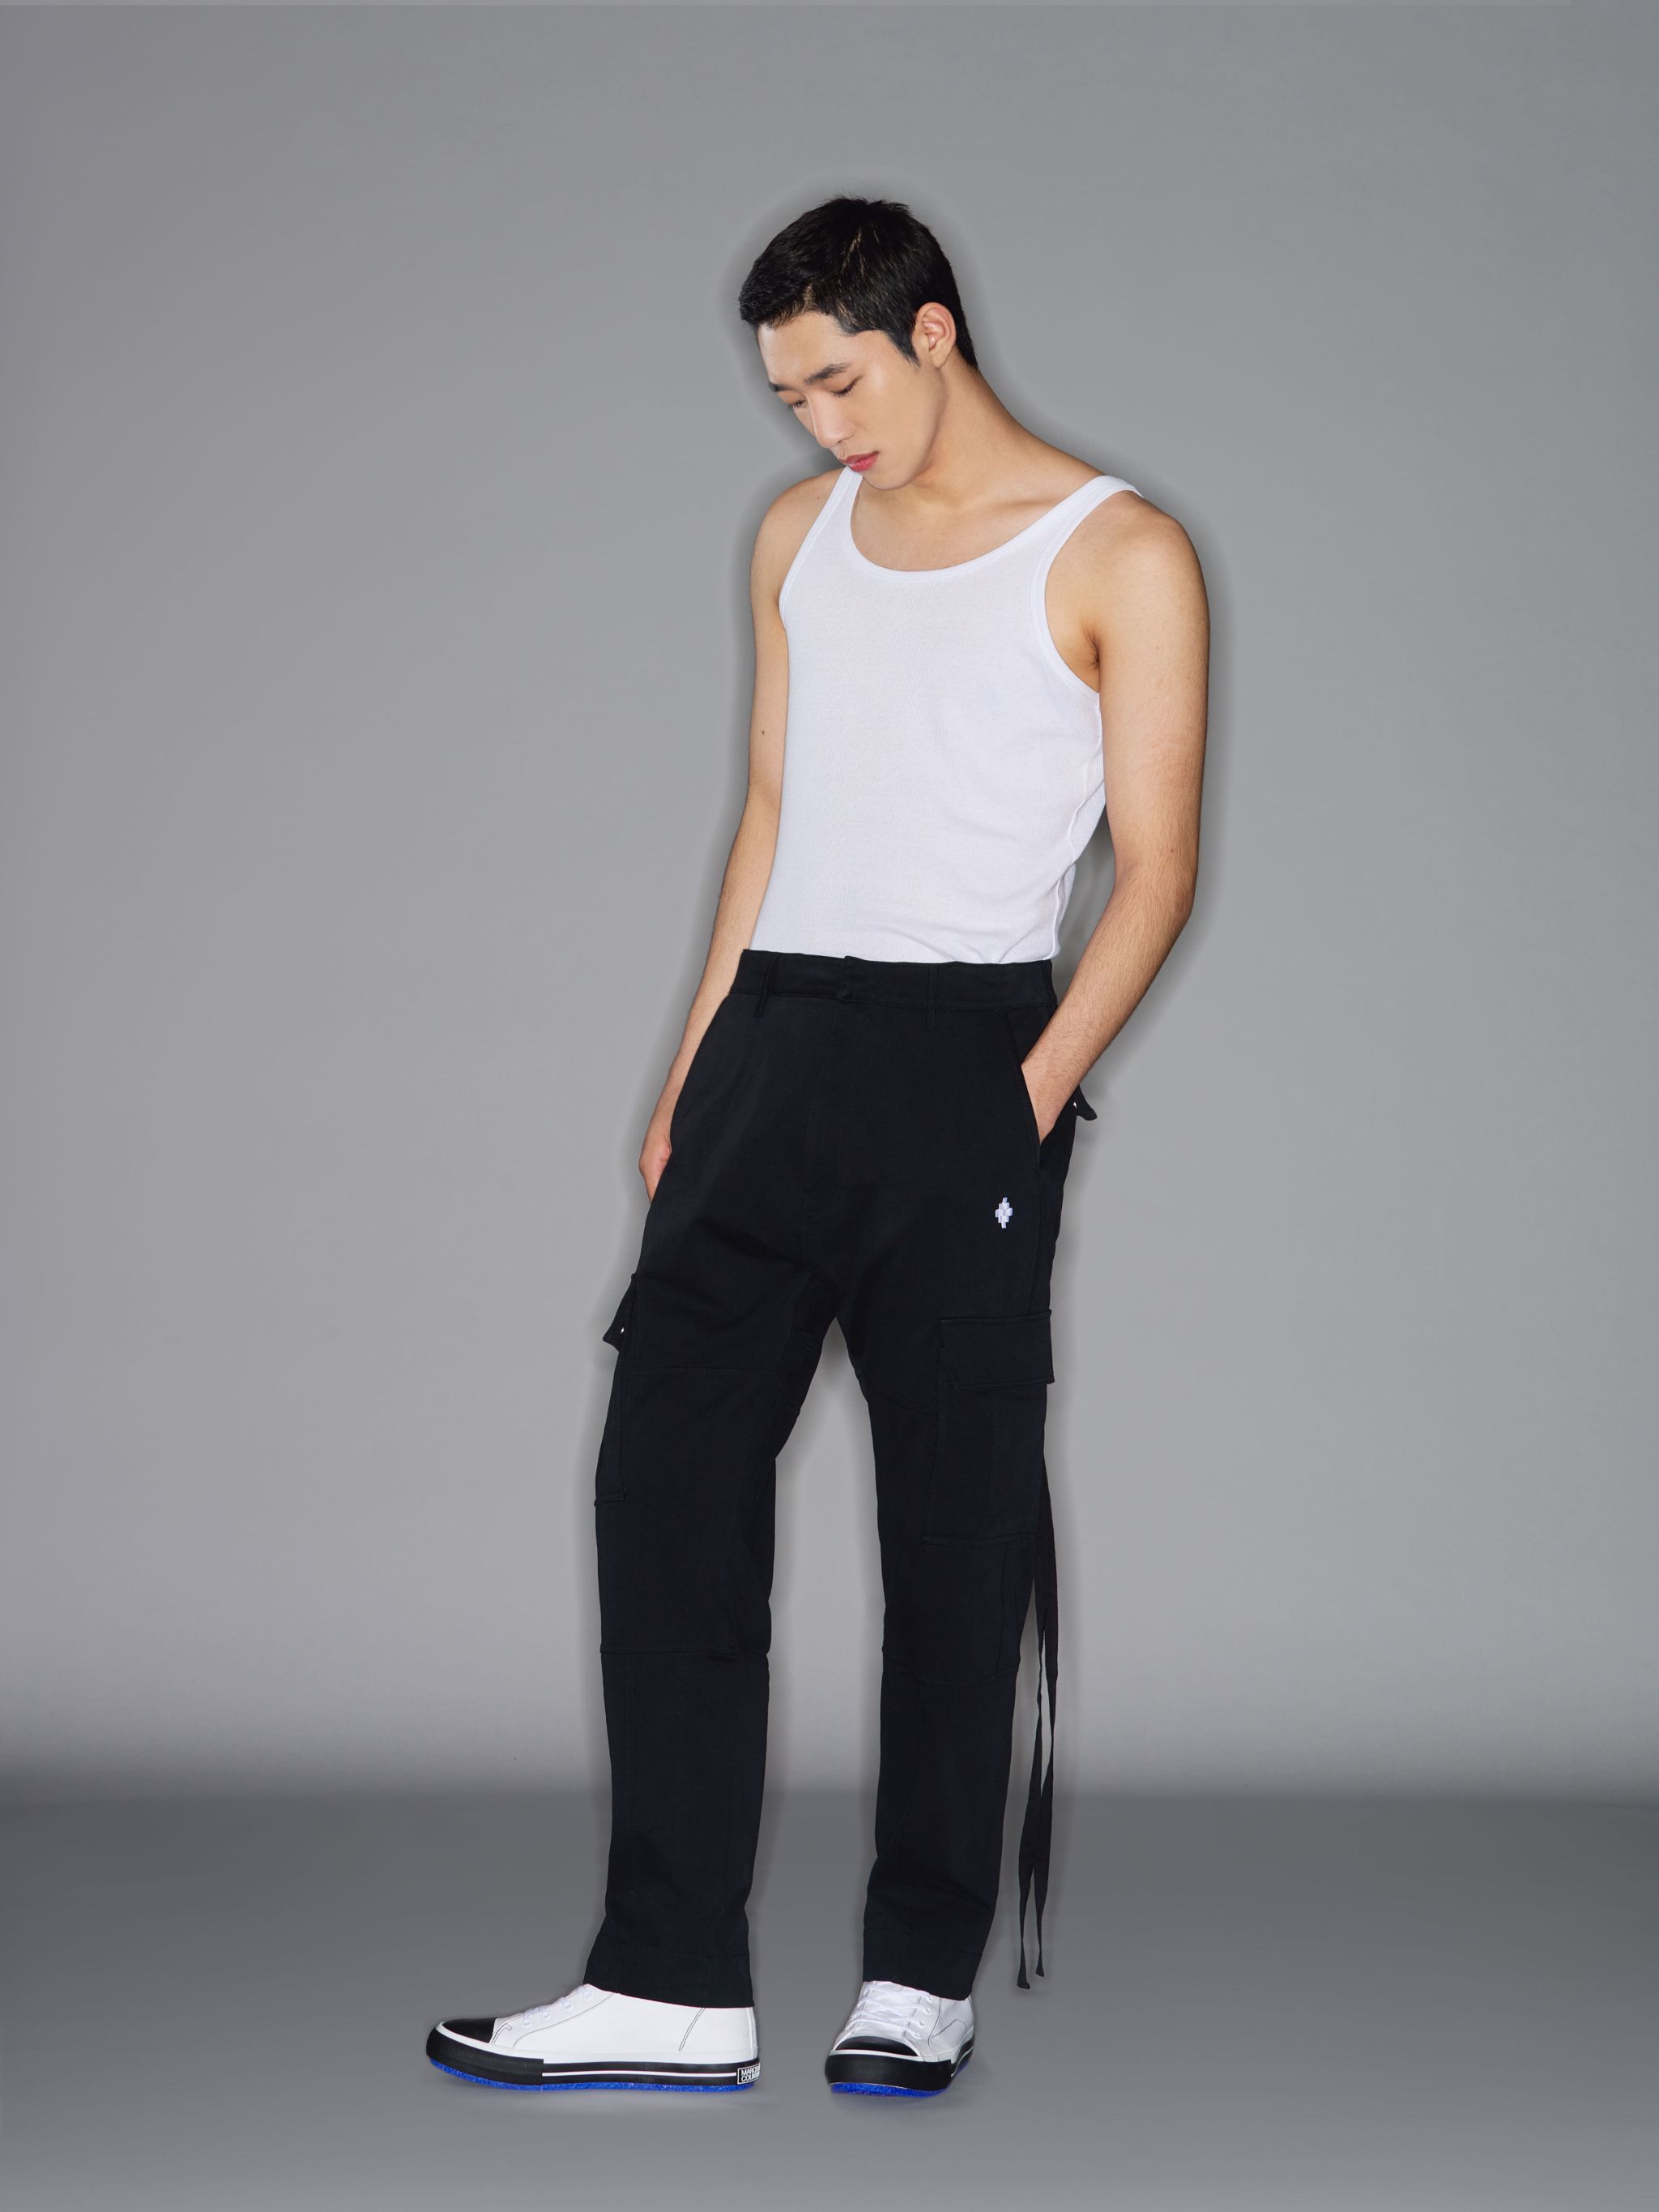 Black cotton Cross embroidered cargo track pants from Marcelo Burlon County of Milan featuring concealed front fastening, belt loops, two side cargo pockets, two rear flap pockets and signature Cross motif.